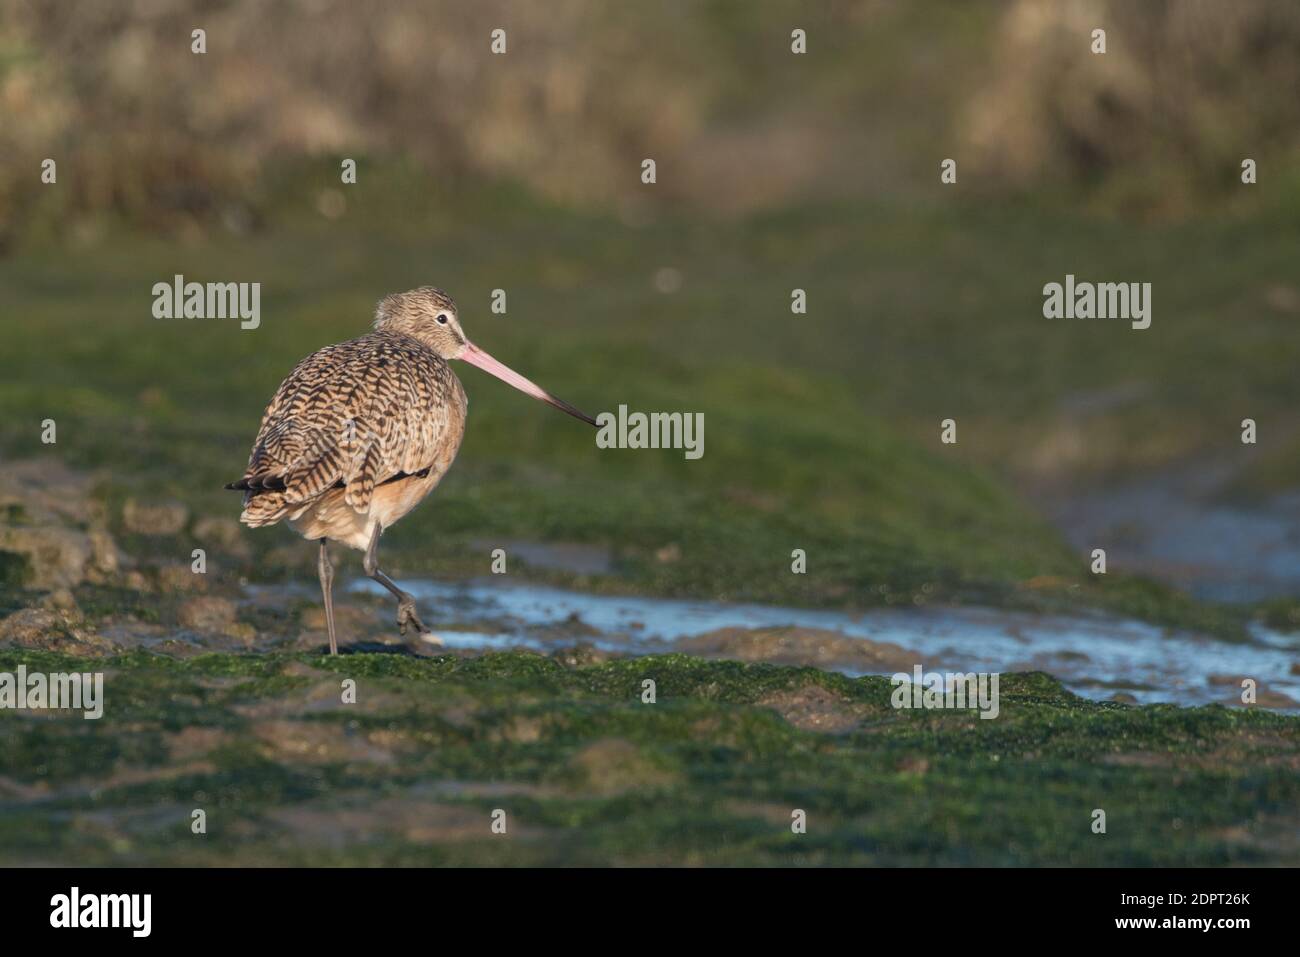 A marbled godwit (Limosa fedoa), a shorebird foraging along a mudflat in Moss landing state wildlife area in Monterey County, California Stock Photo